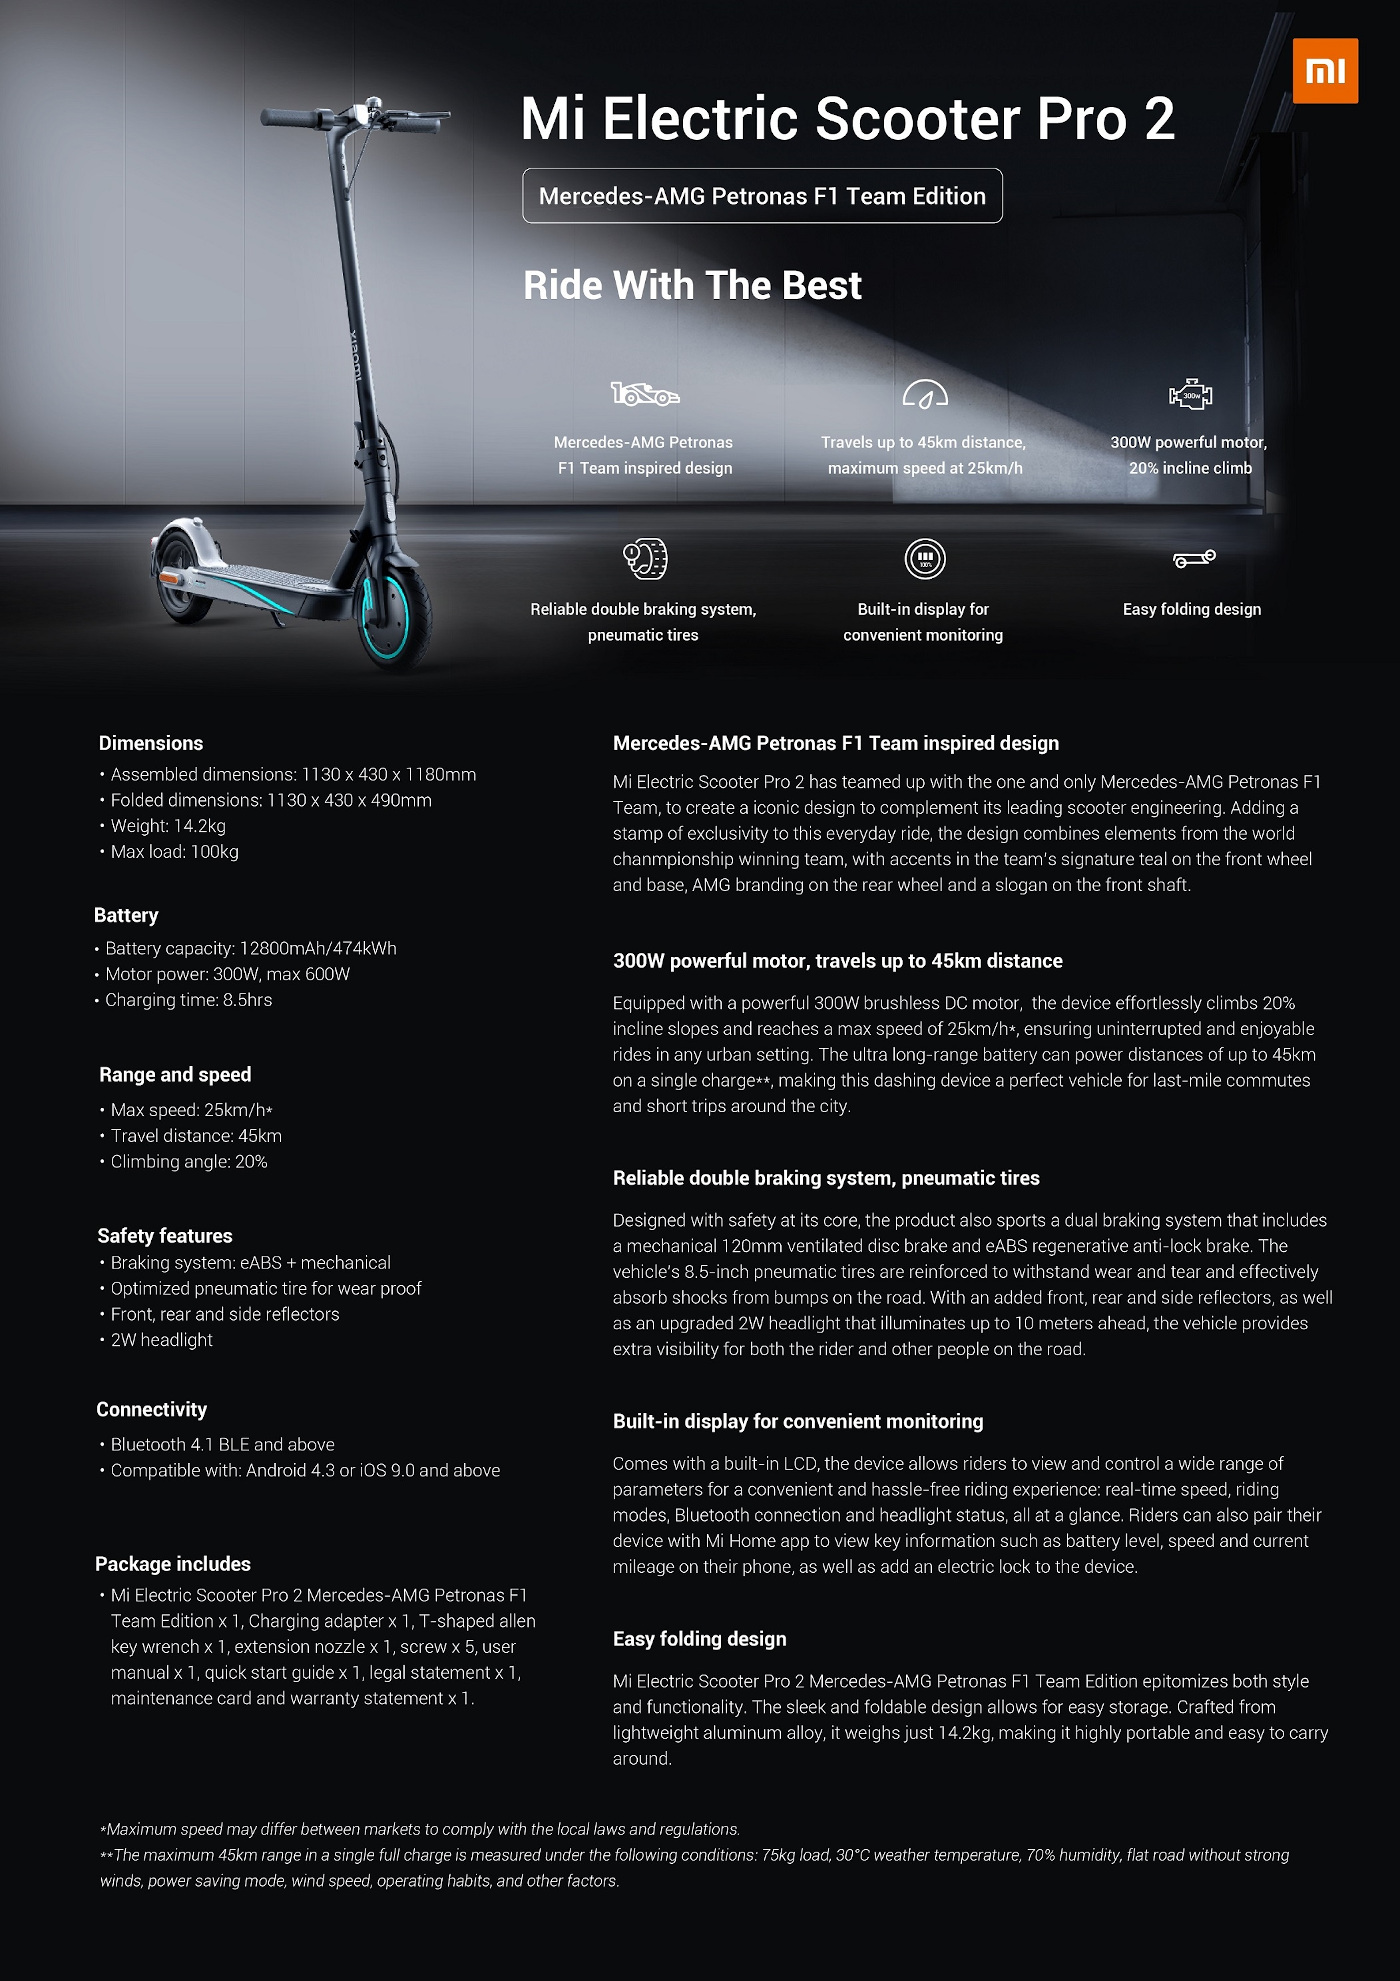 Mi Electric Scooter Pro 2 Mercedes-AMG Petronas F1 Team - onepager